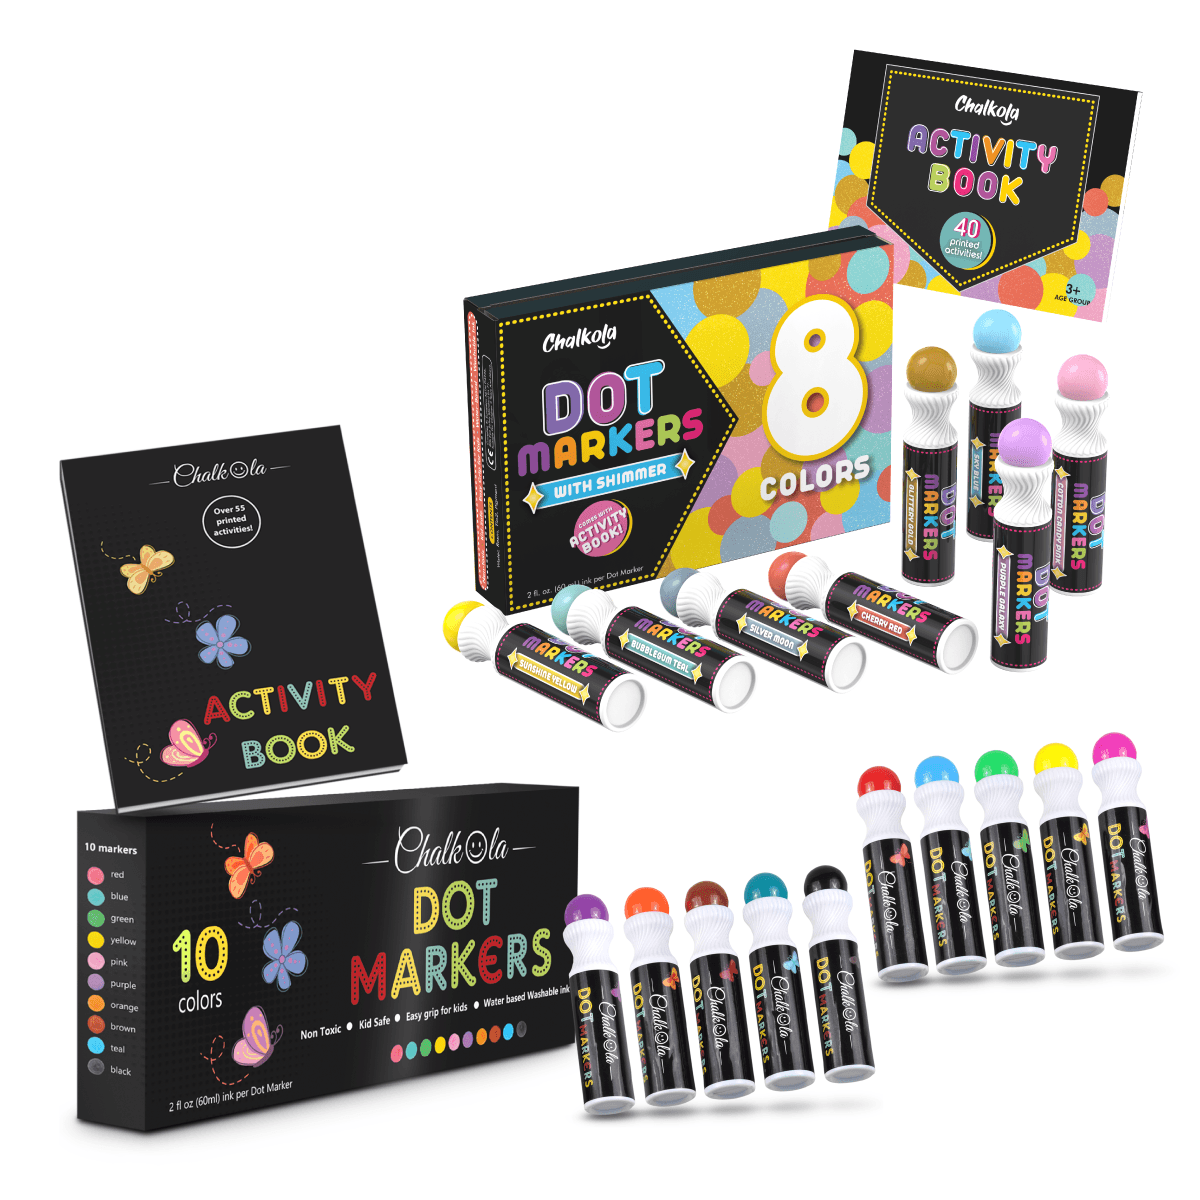 Shuttle Art Shimmer Dot Markers, 15 Glitter Colors Washable Markers for  Toddlers,Bingo Daubers Supplies Kids Preschool Children, Non Toxic  Water-Based